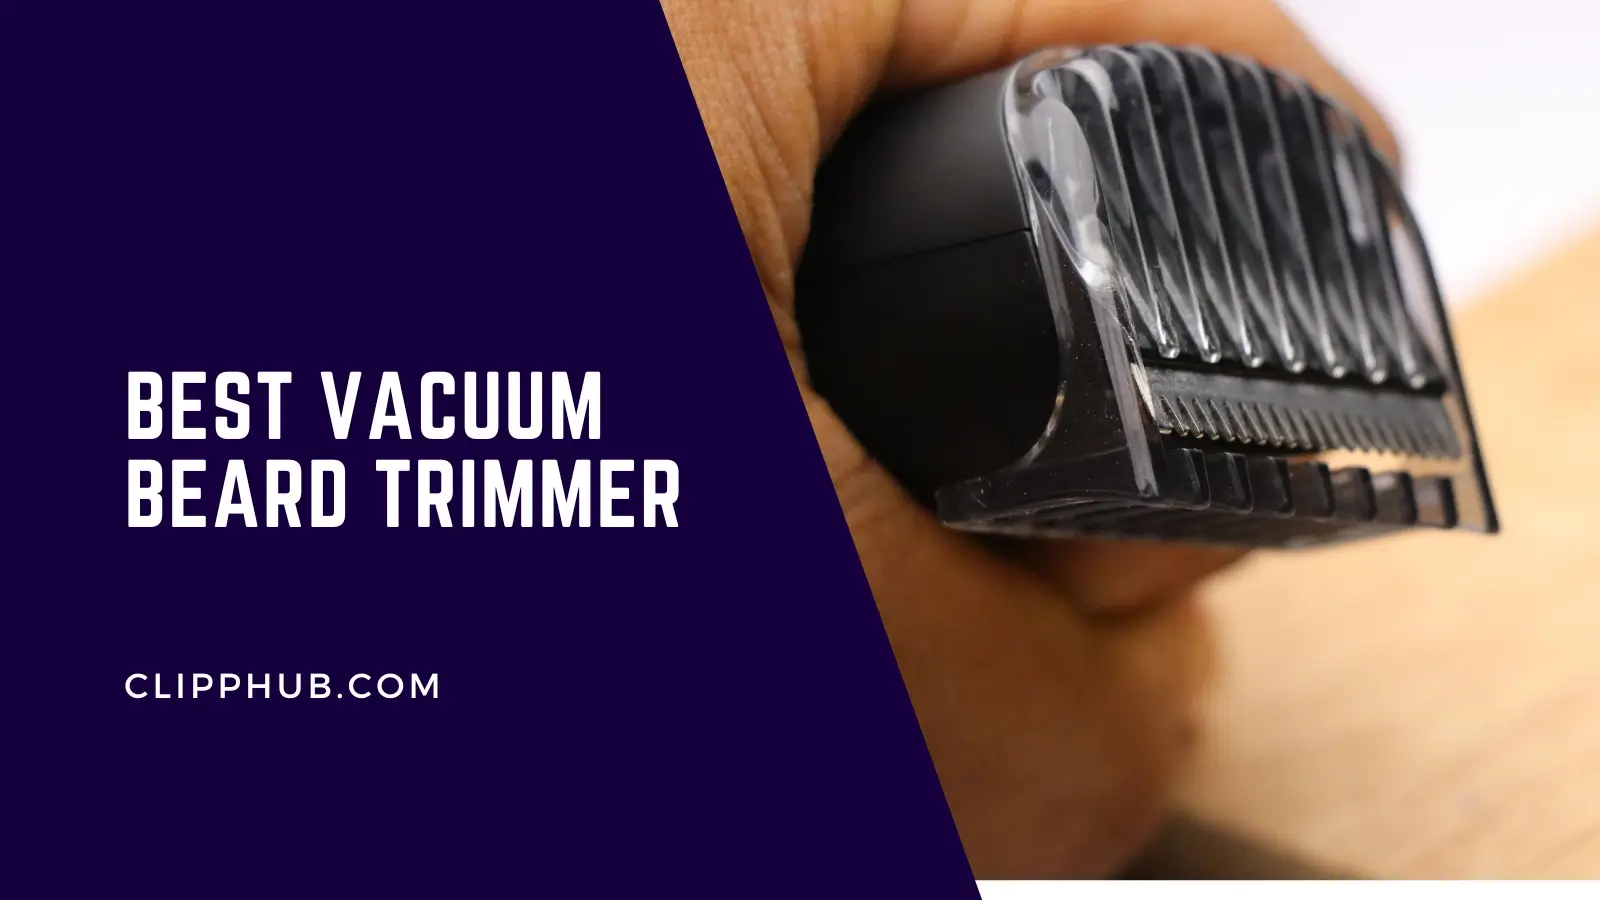 Beard trimmer with vacuum